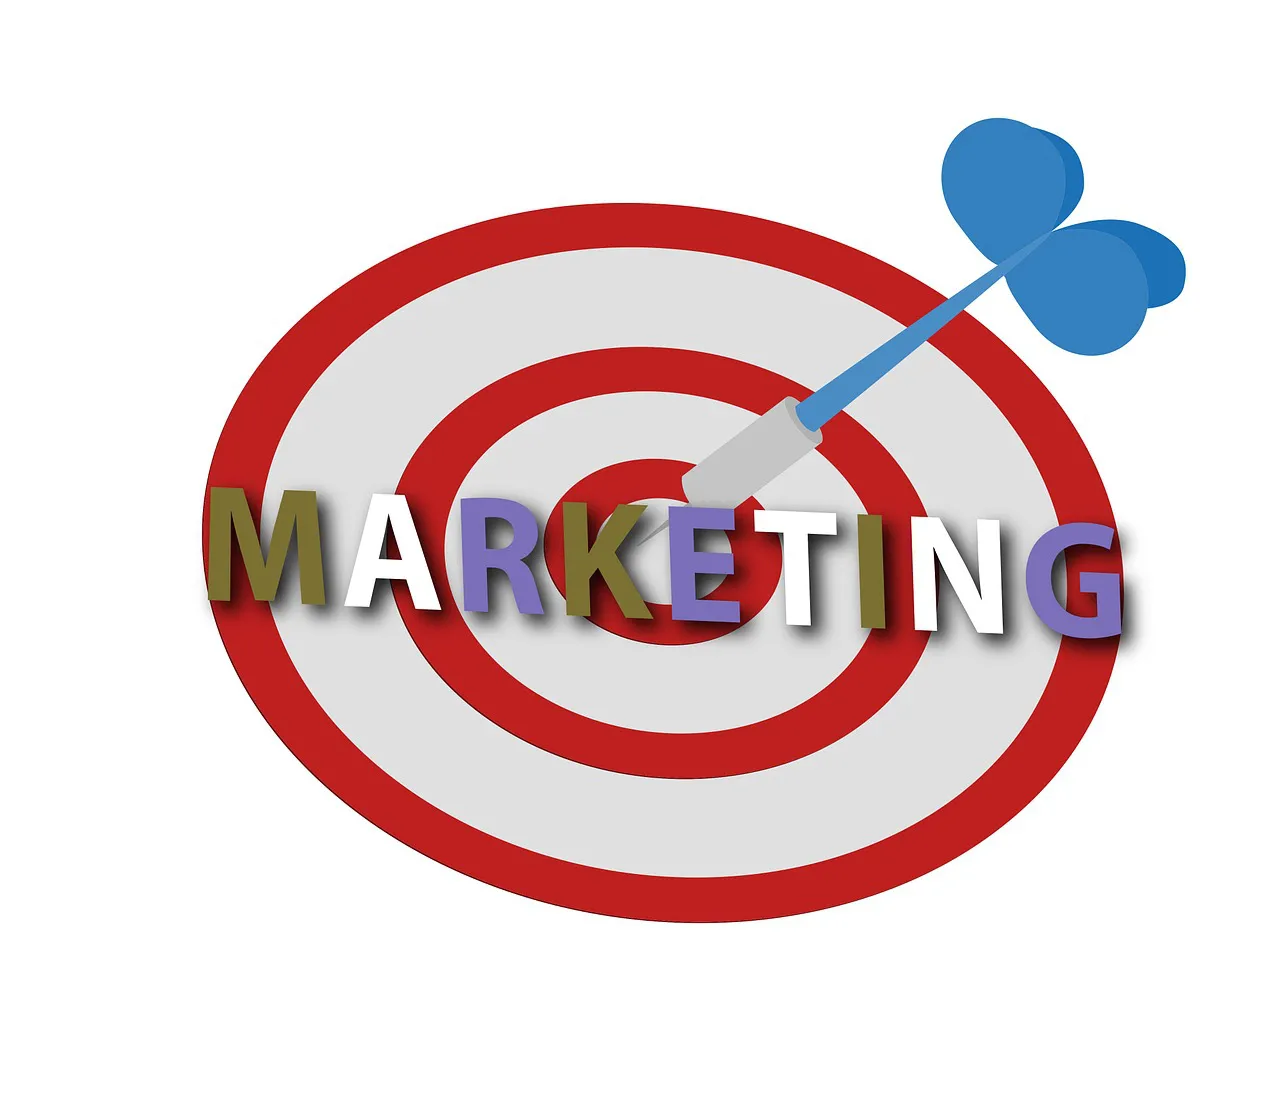 Create Your Marketing Machine to Plan for Marketing Success